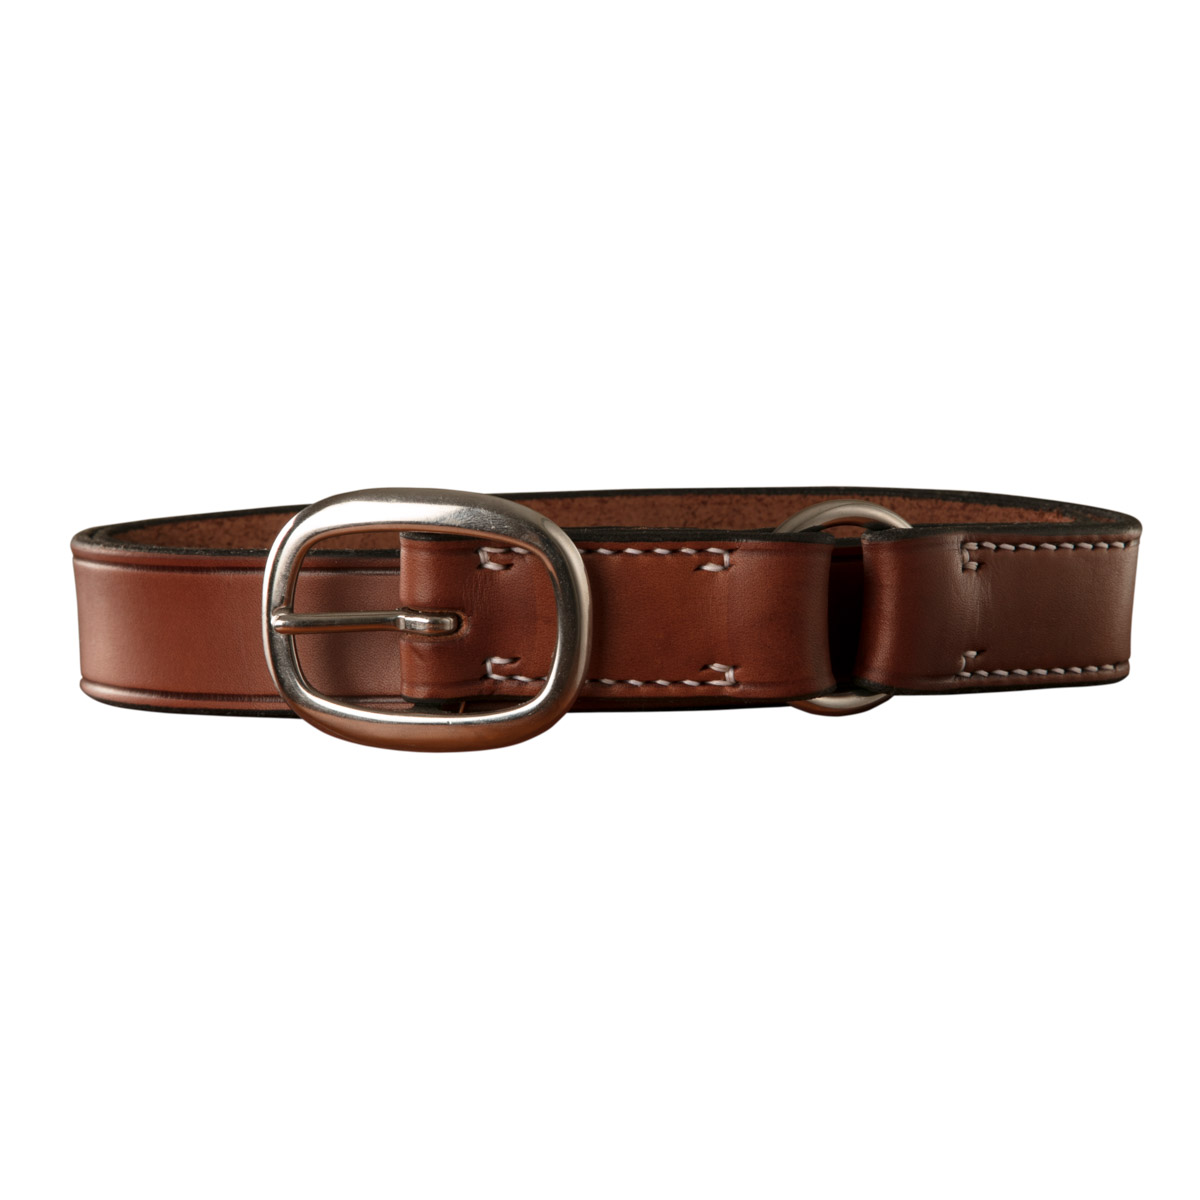 Stockmans Belt, Solid Leather, with Stainless Steel Swage Buckle and Ring 1